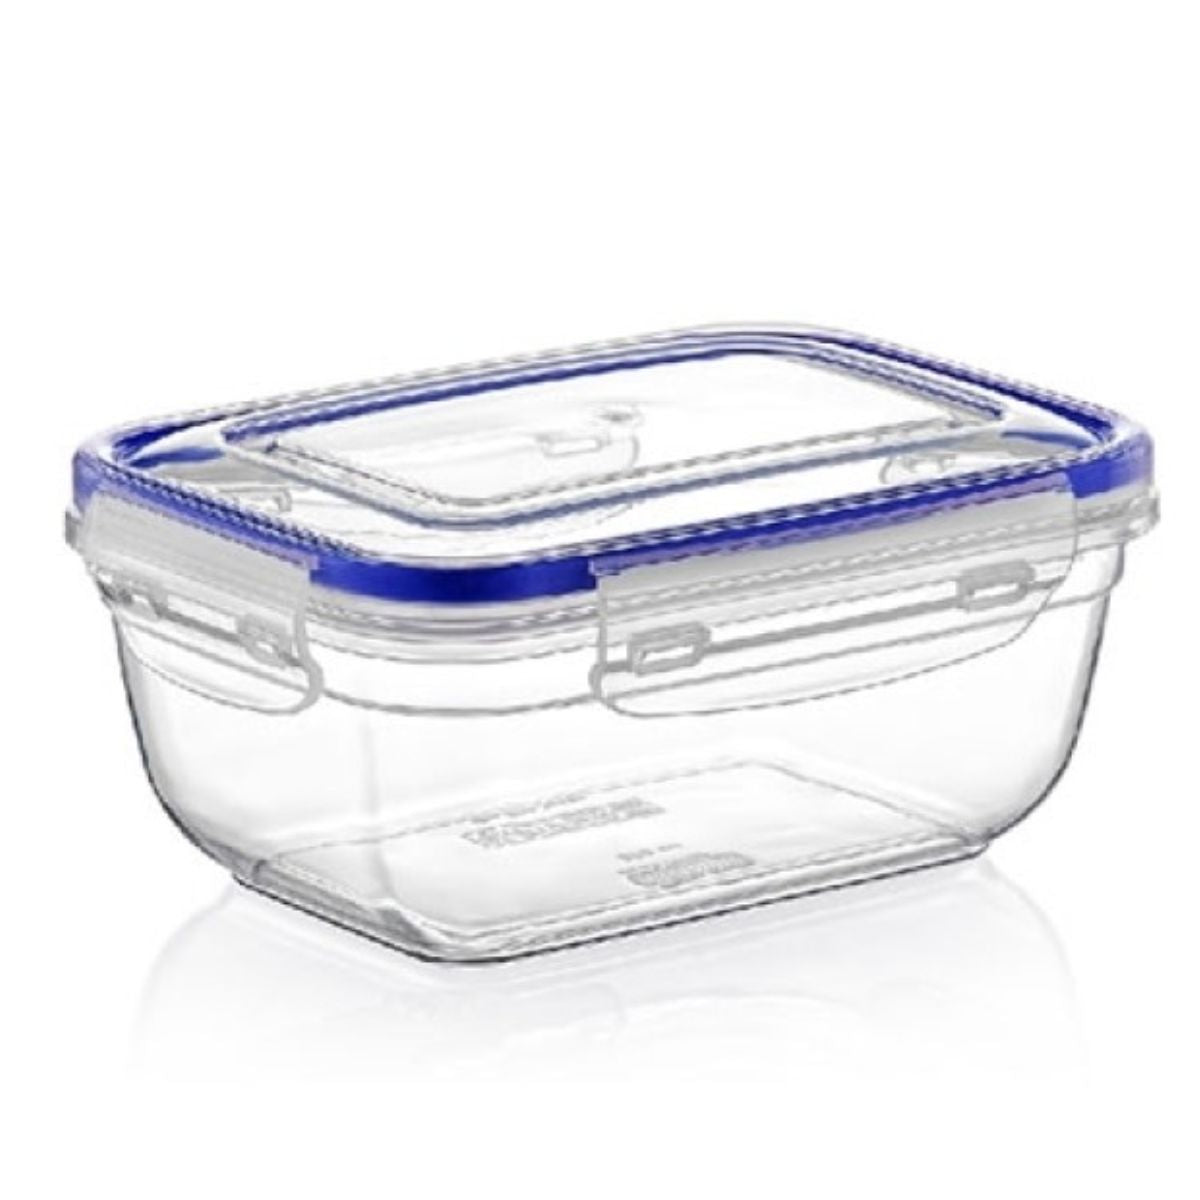 A Lock & Fresh - Seal Rectangle Storage - 800ml container with blue lid on a white background.